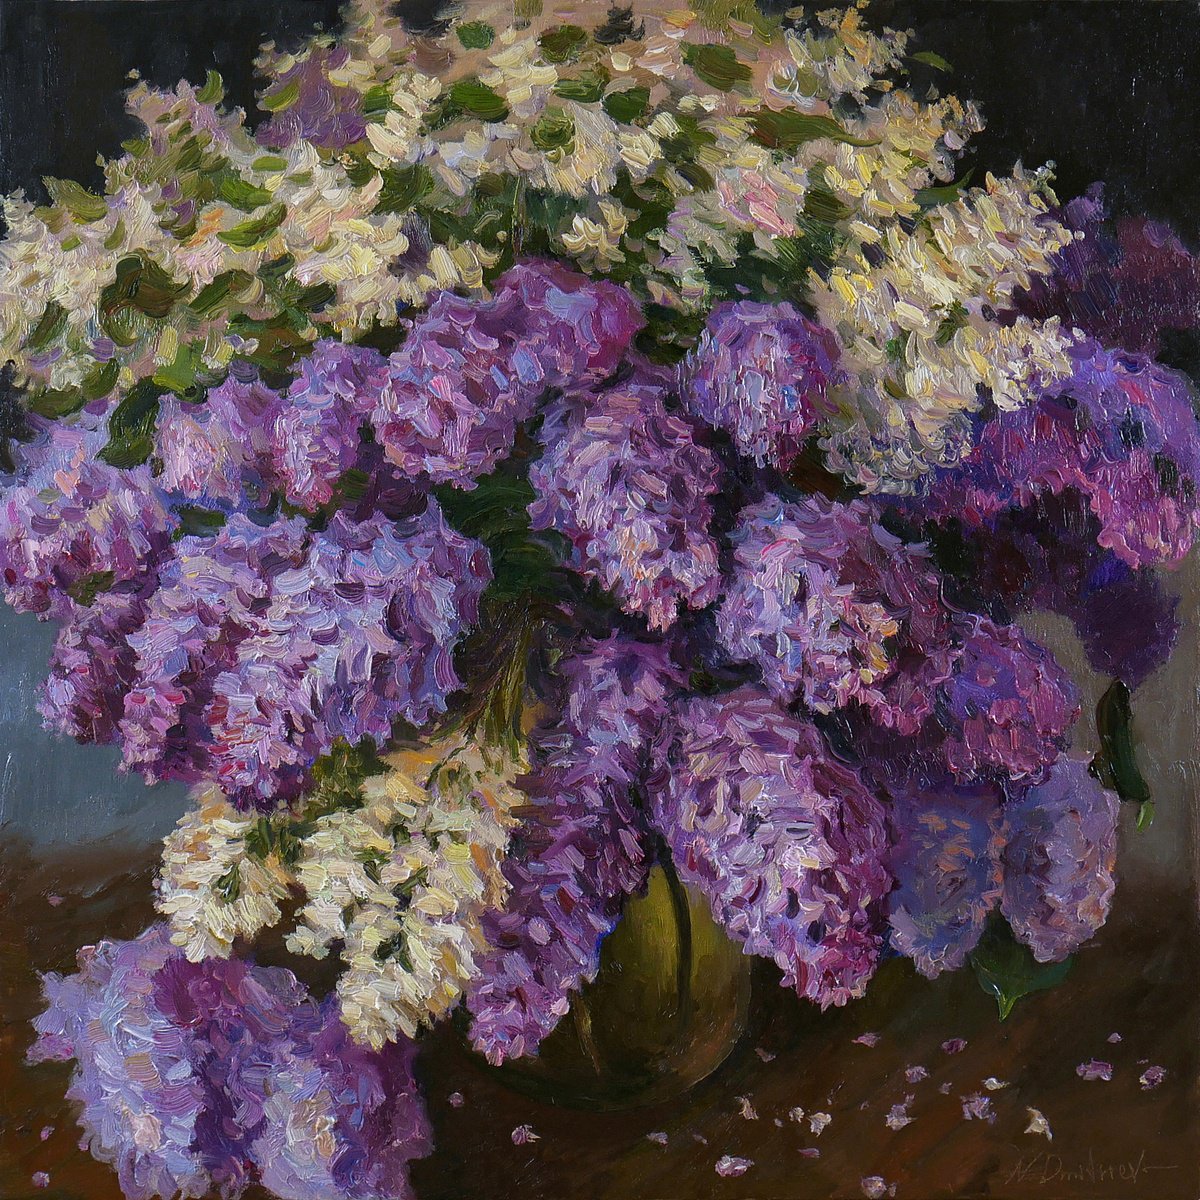 The Bouquet of Aromatic Lilacs - Lilacs painting by Nikolay Dmitriev